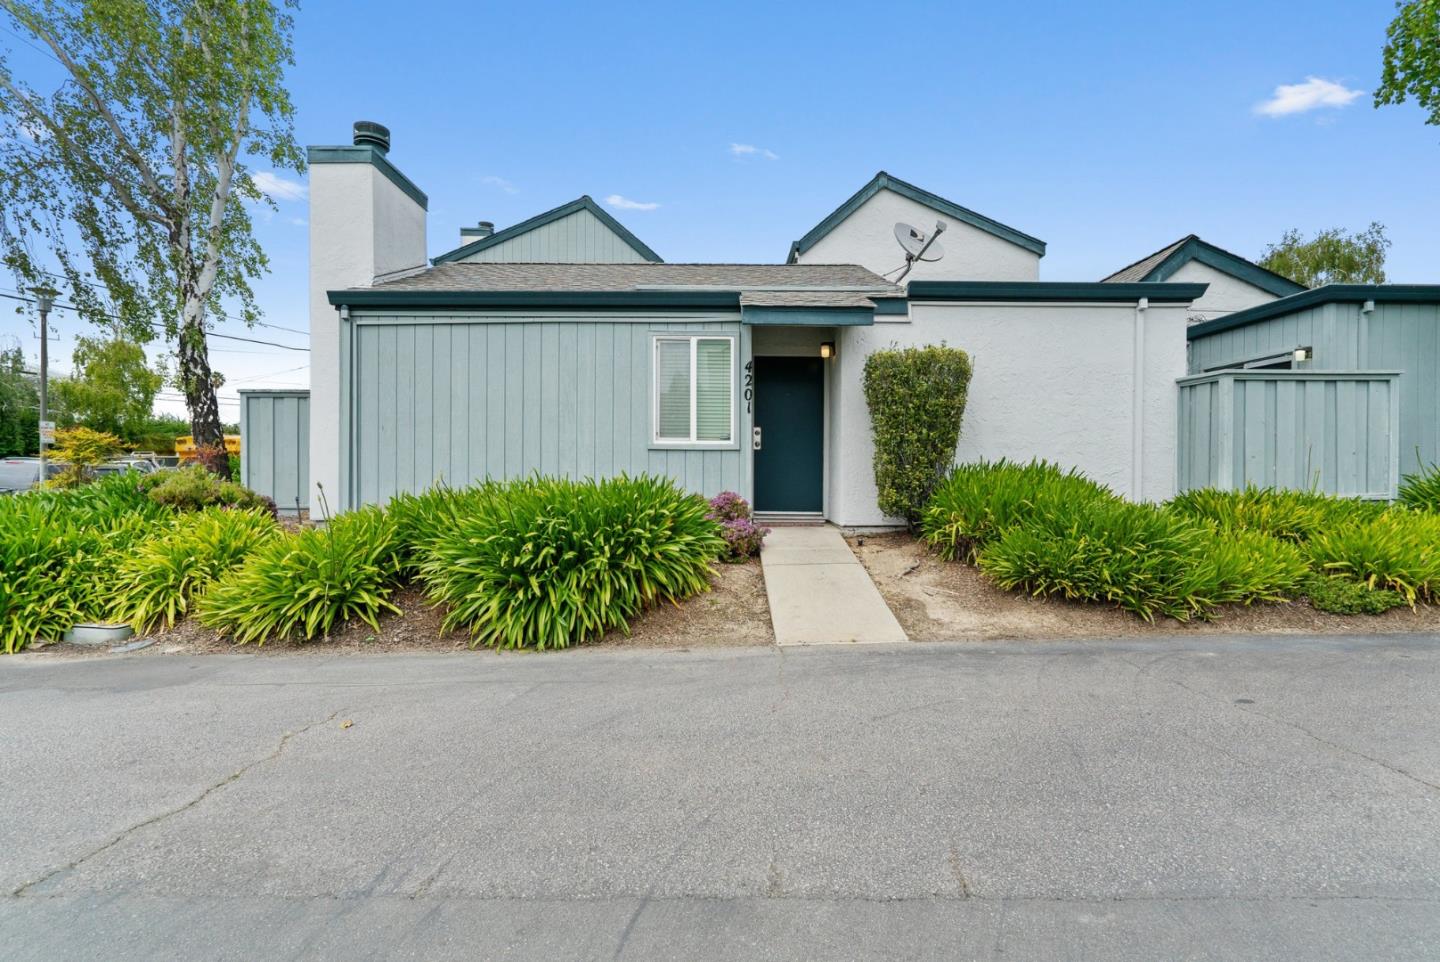 Photo of 4201 Sea Pines Ct in Capitola, CA